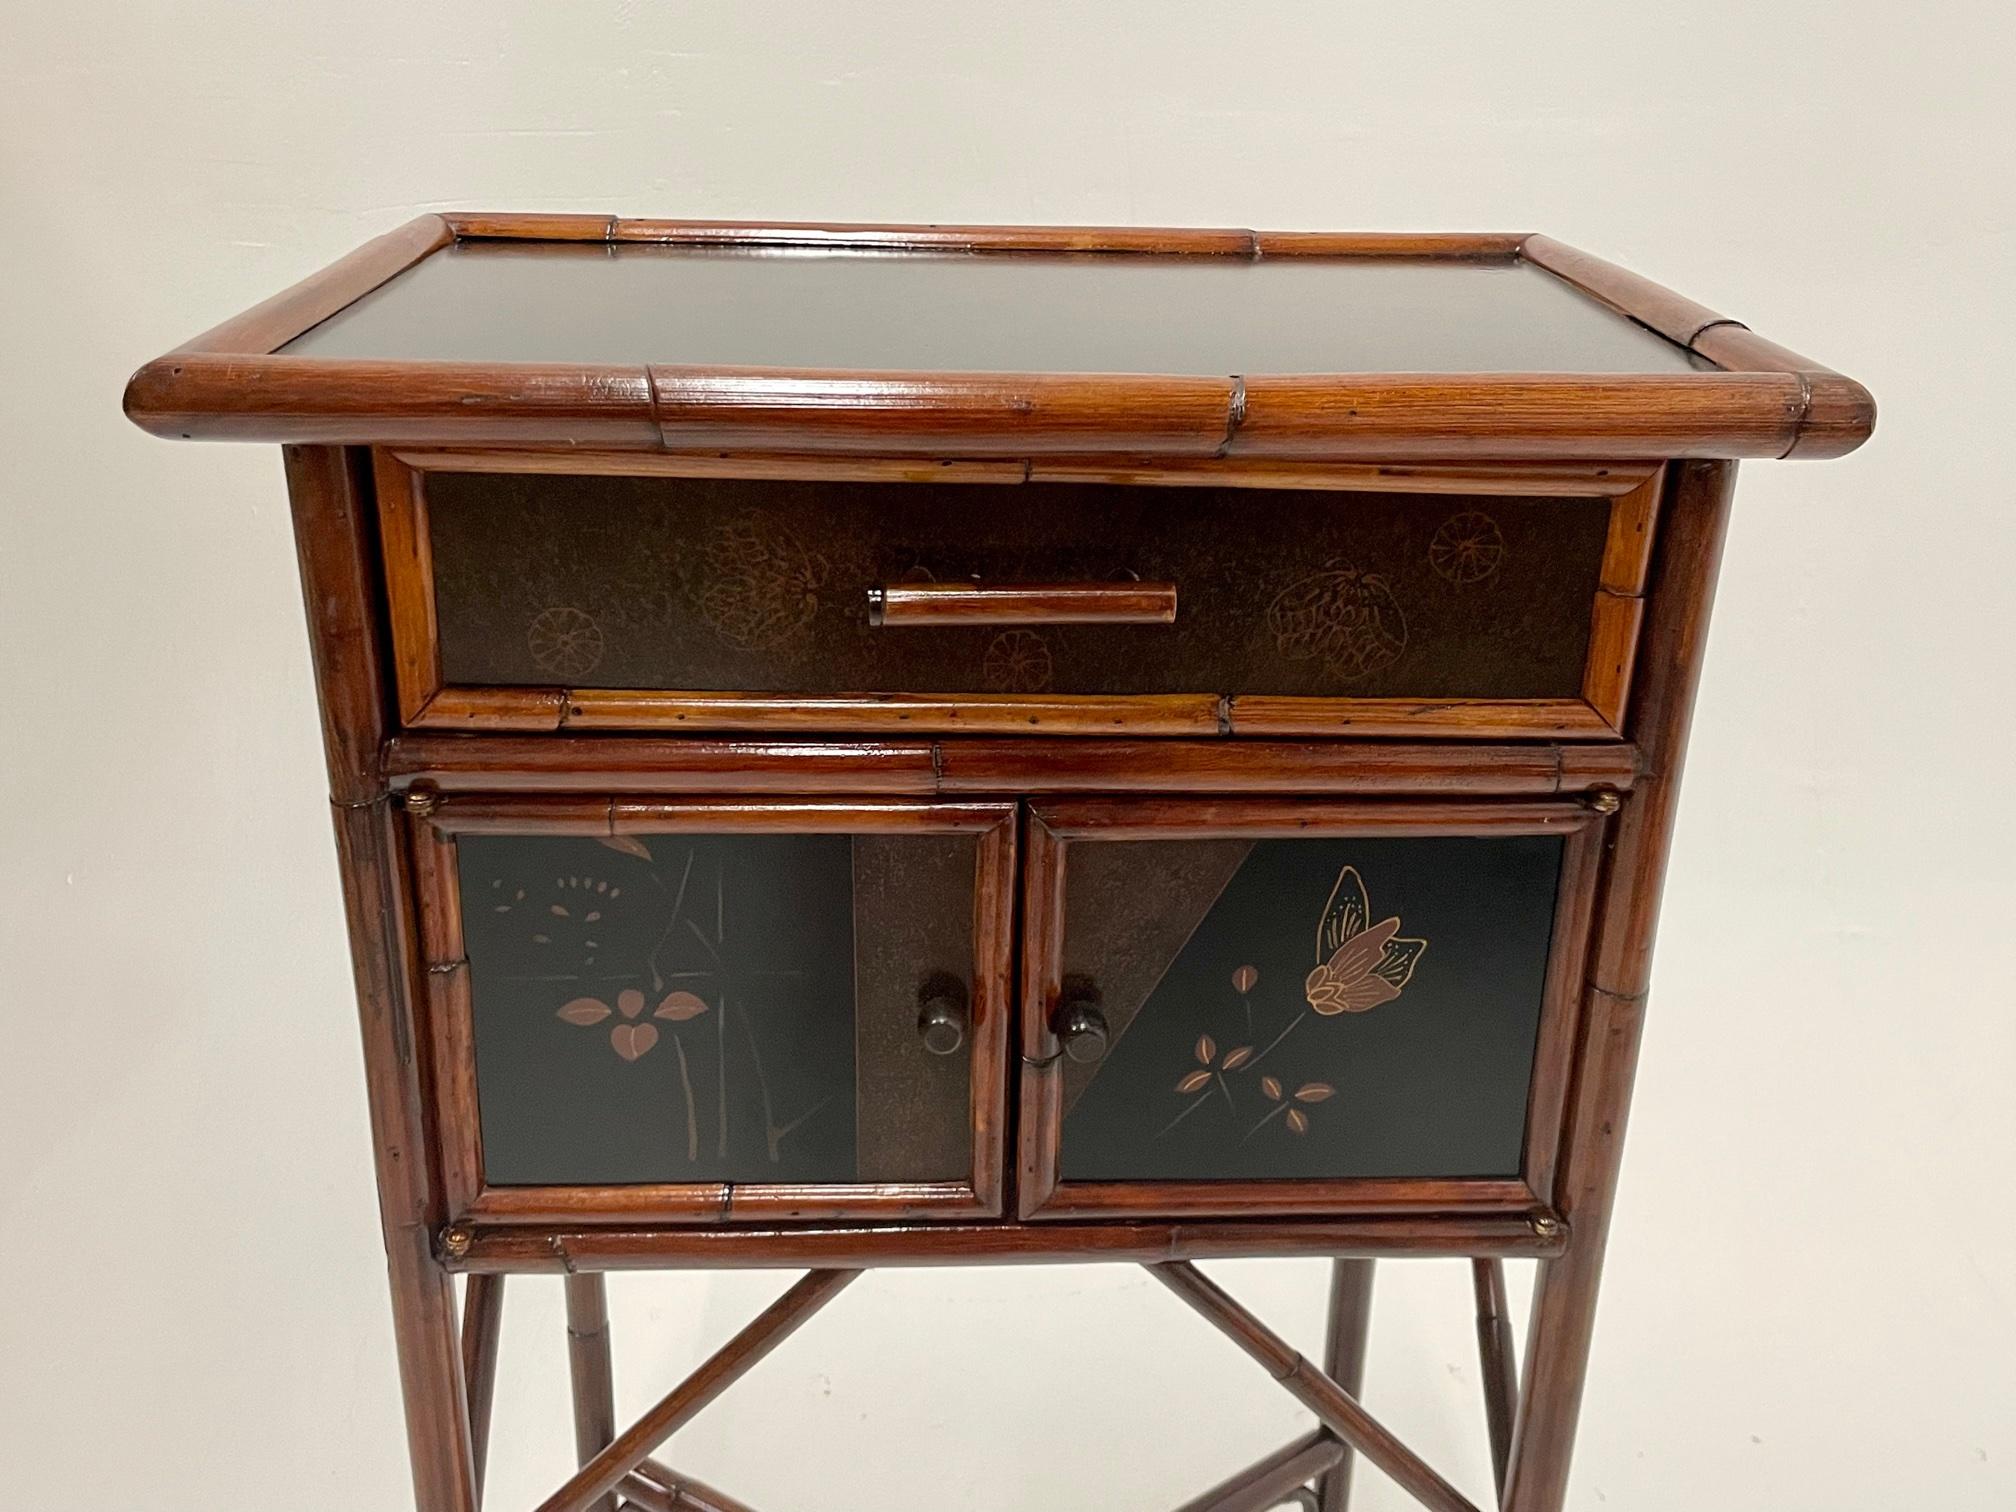 A lovely refined bamboo and chinoiserie decorated ebonized side table or night stand having single drawer over pair of doors that open to storage within. Legs are slightly splayed with Asian flair and x stretcher.